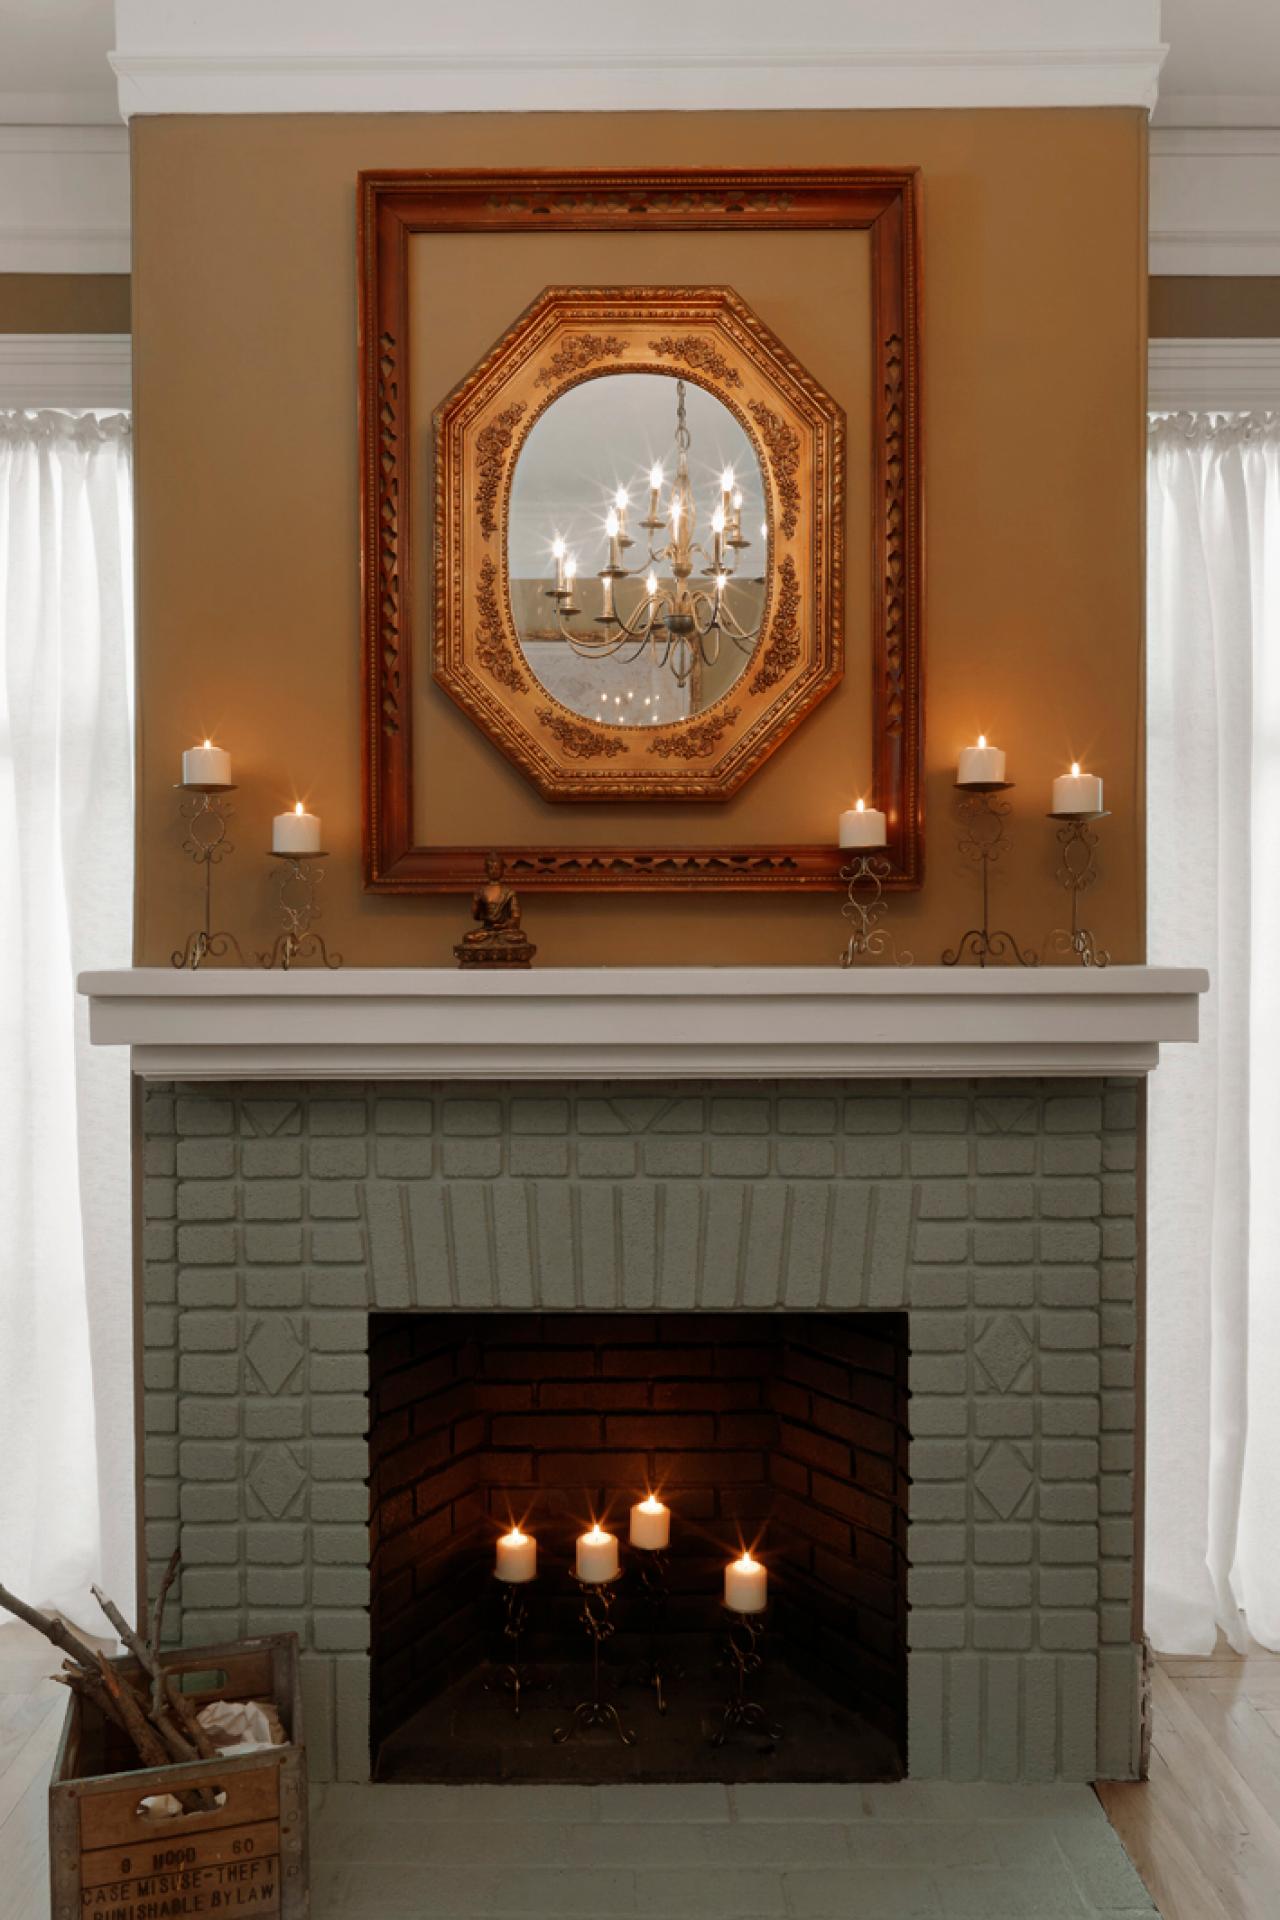 Painted Brick Fireplace Makeover How, How To Cover Up Old Brick Fireplace